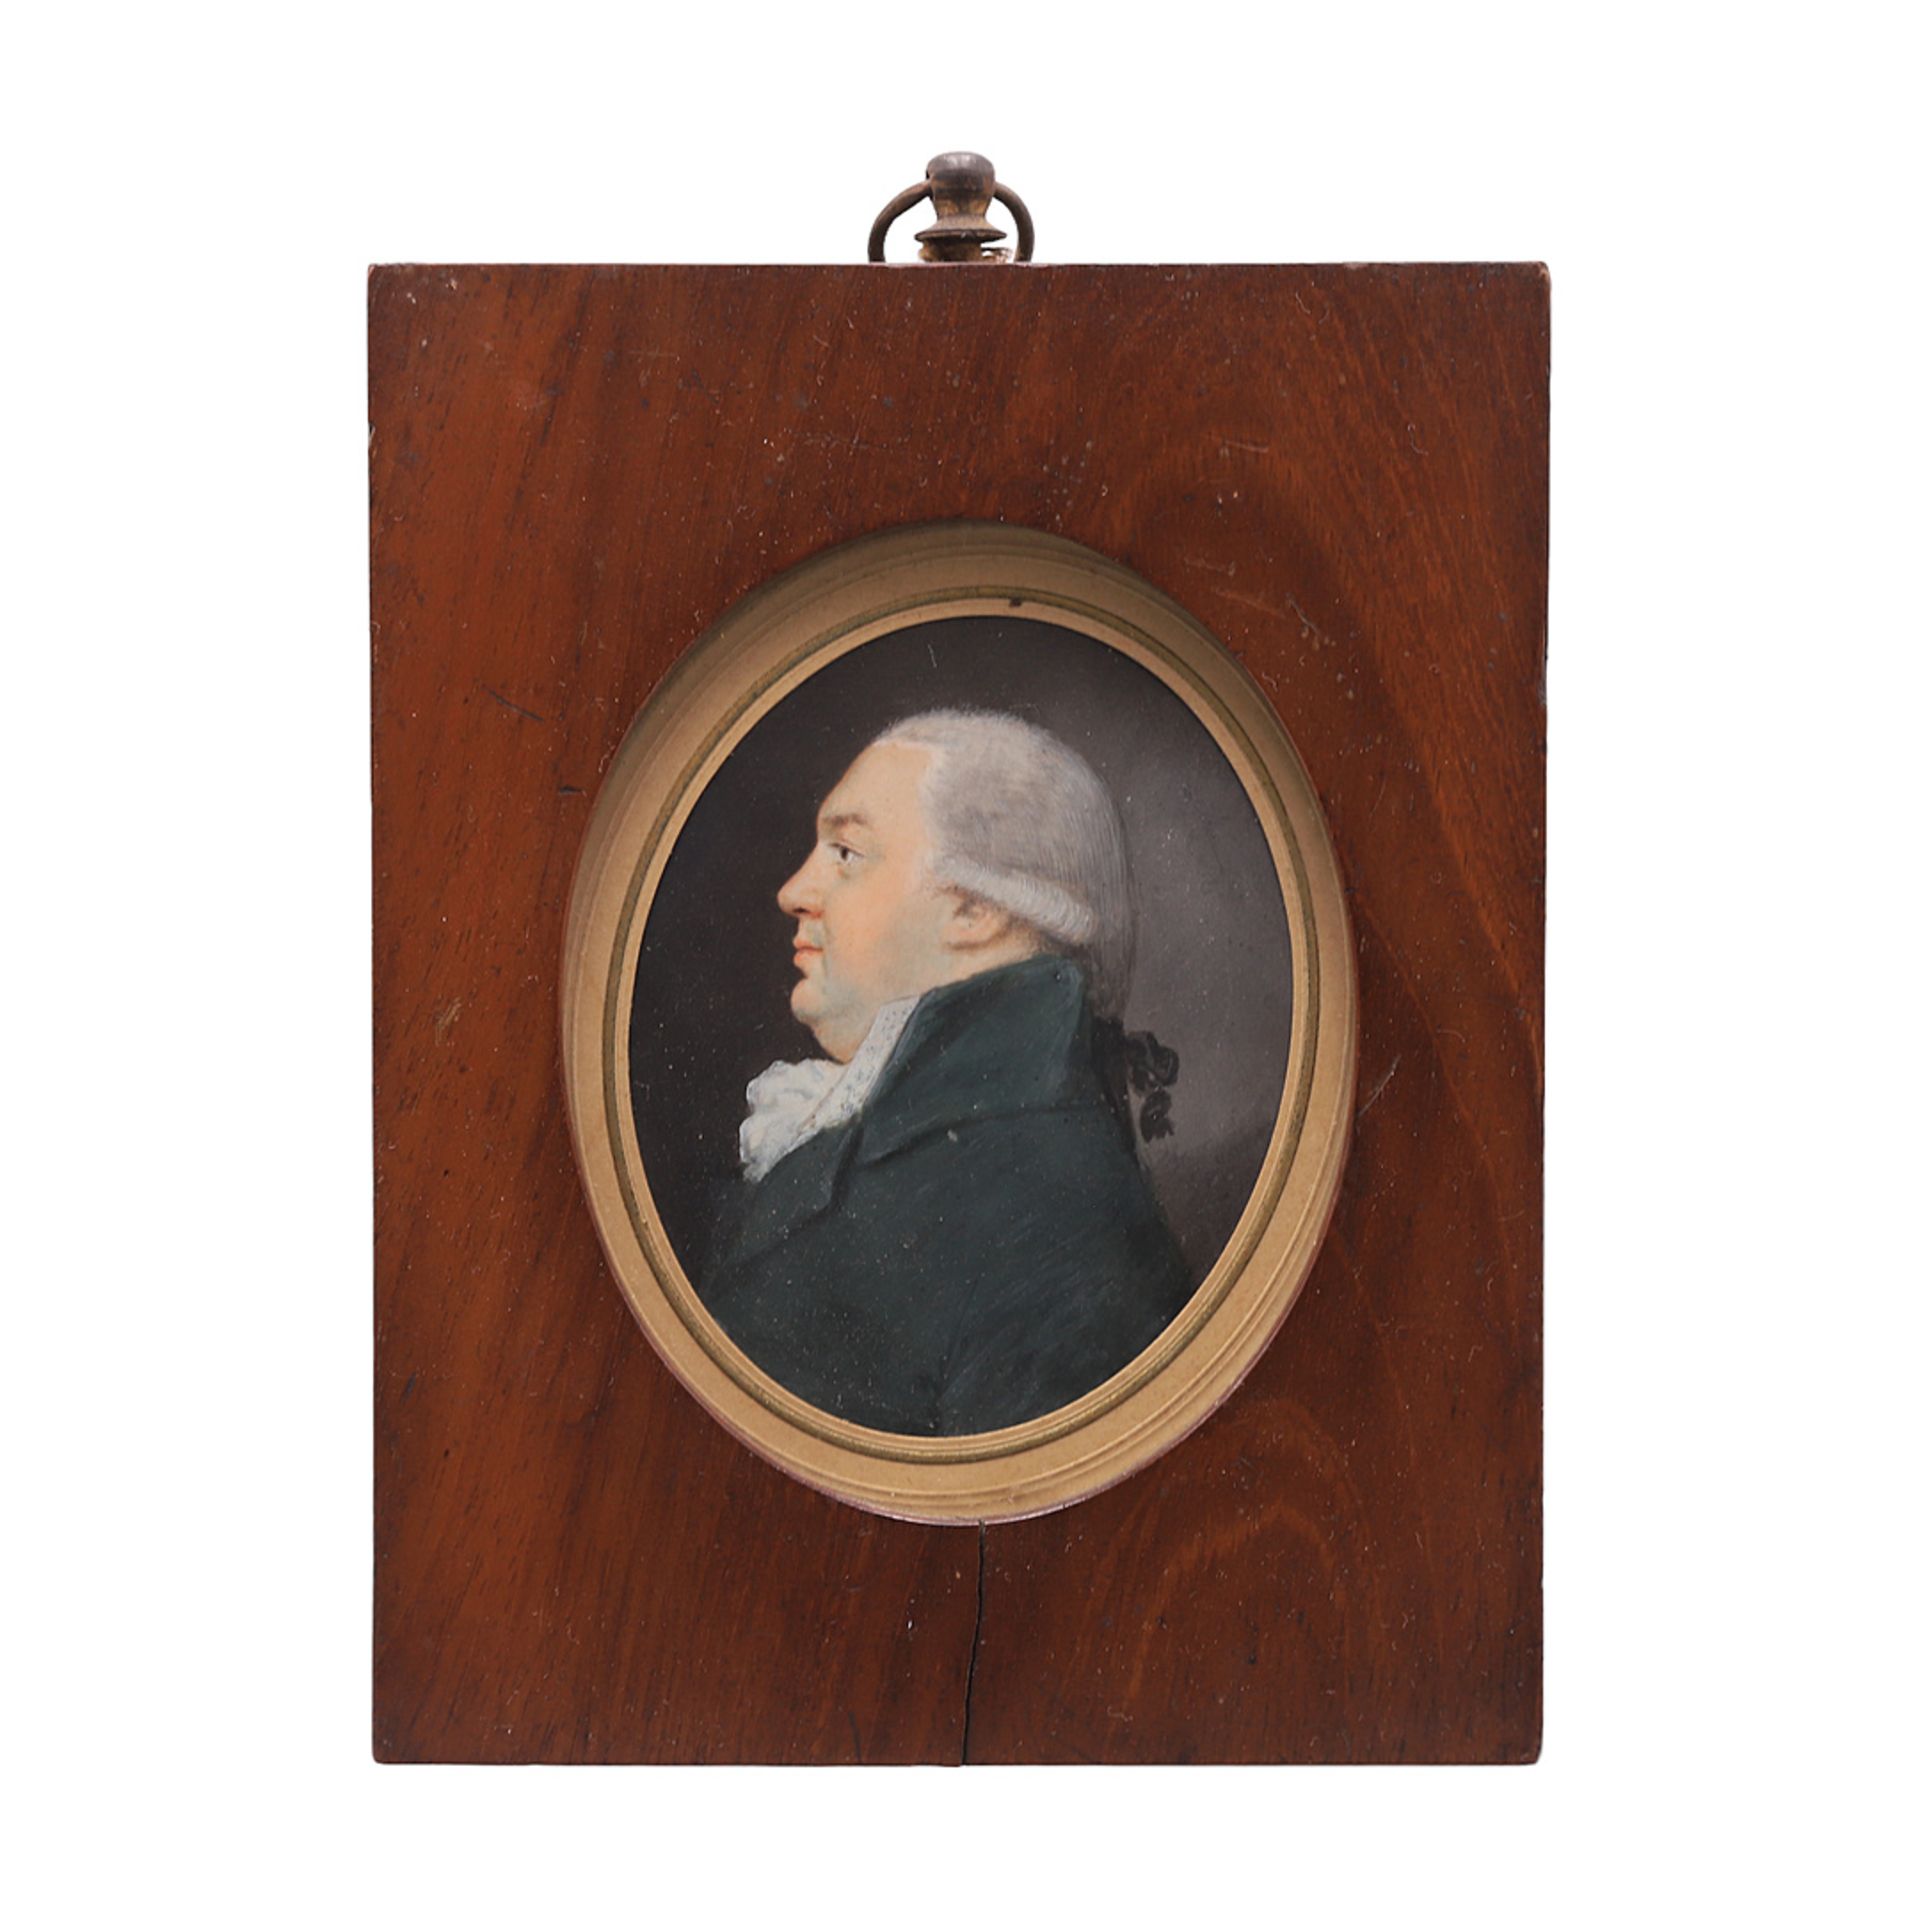 Miniature portrait of a gentleman from the Napoleonic period